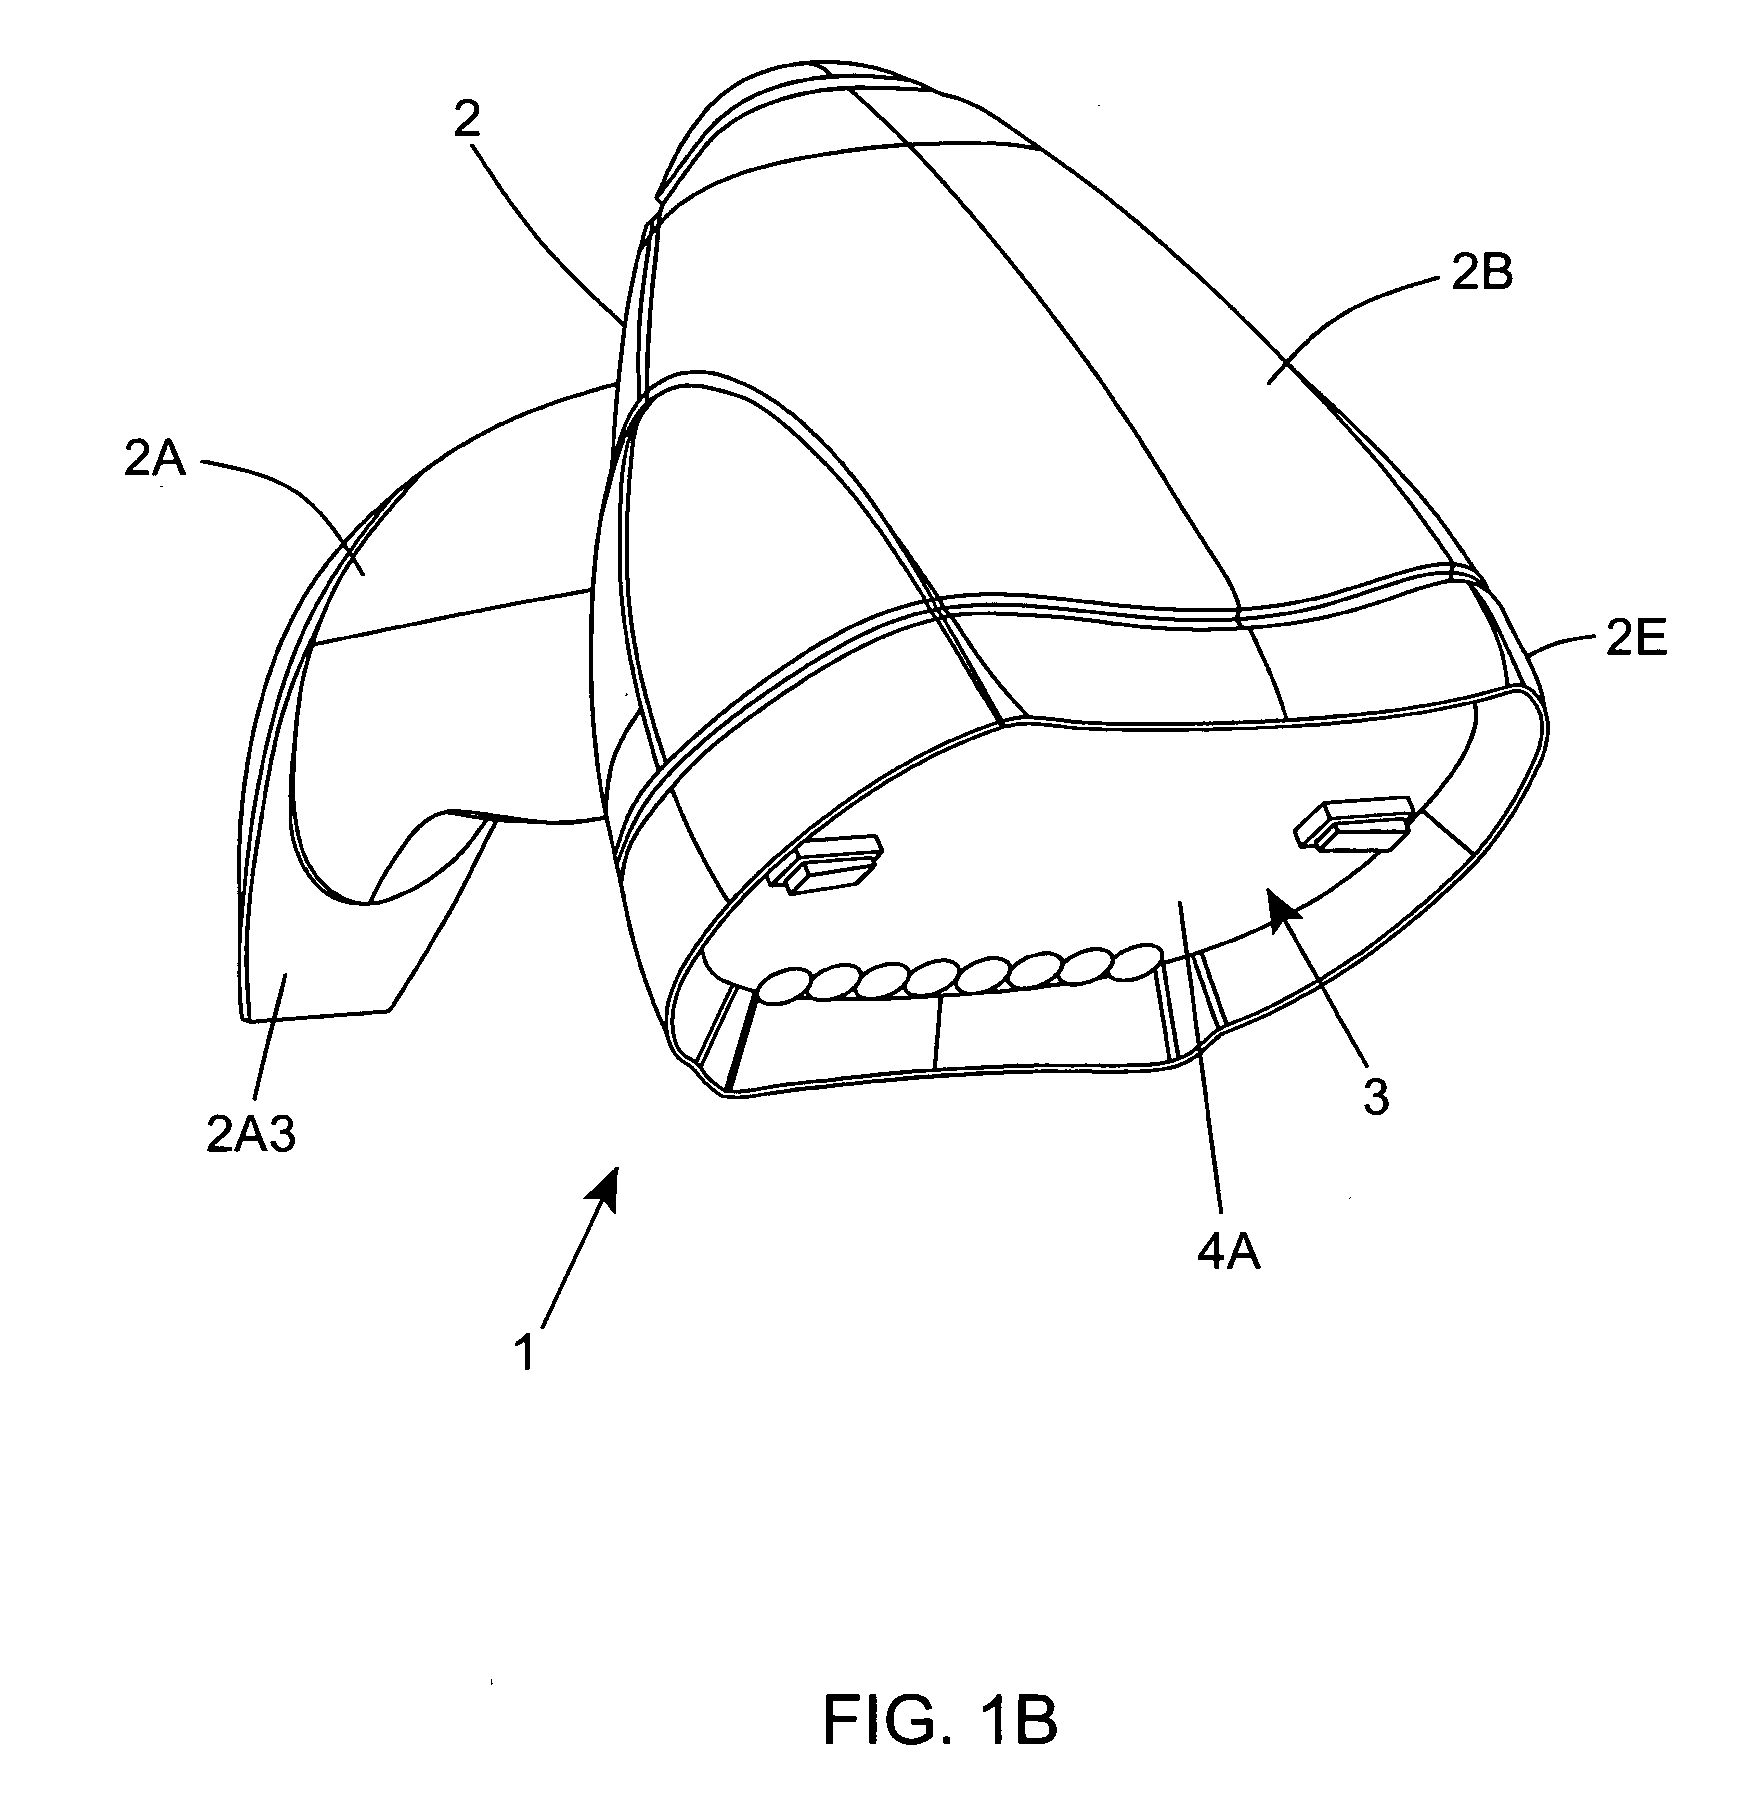 Hand-supportable imaging-based bar code symbol reader employing a multi-mode image-processing based bar code reading subsystem with modular image-processing architecture